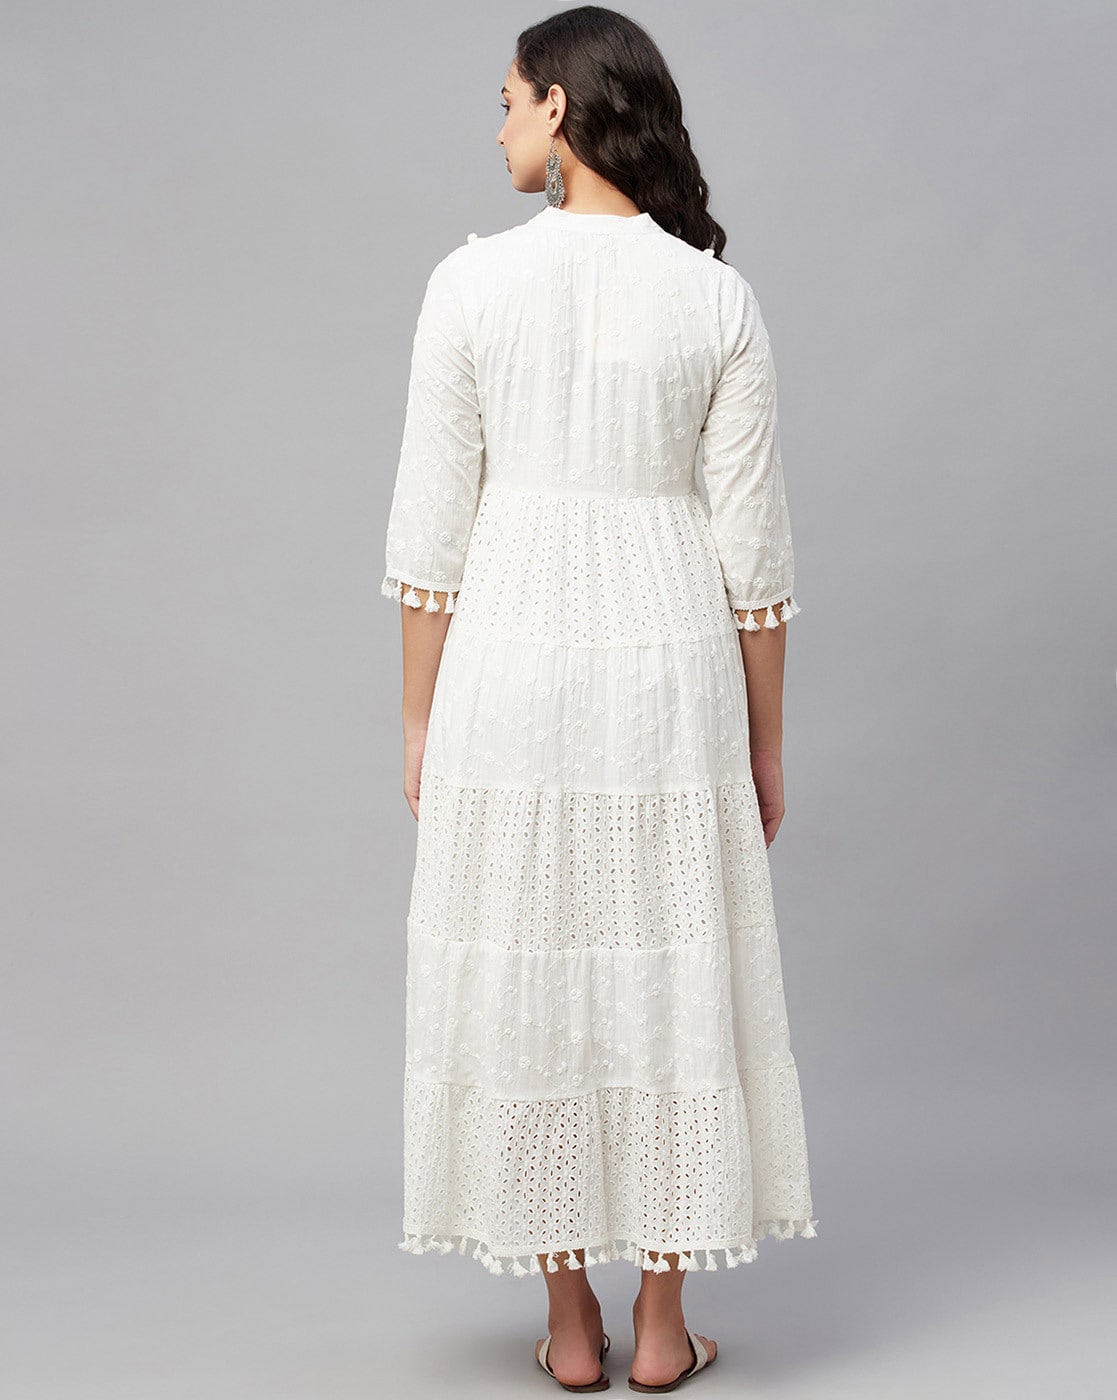 Buy White Dresses & Gowns for Women by Amira's Indian Ethnic Wear